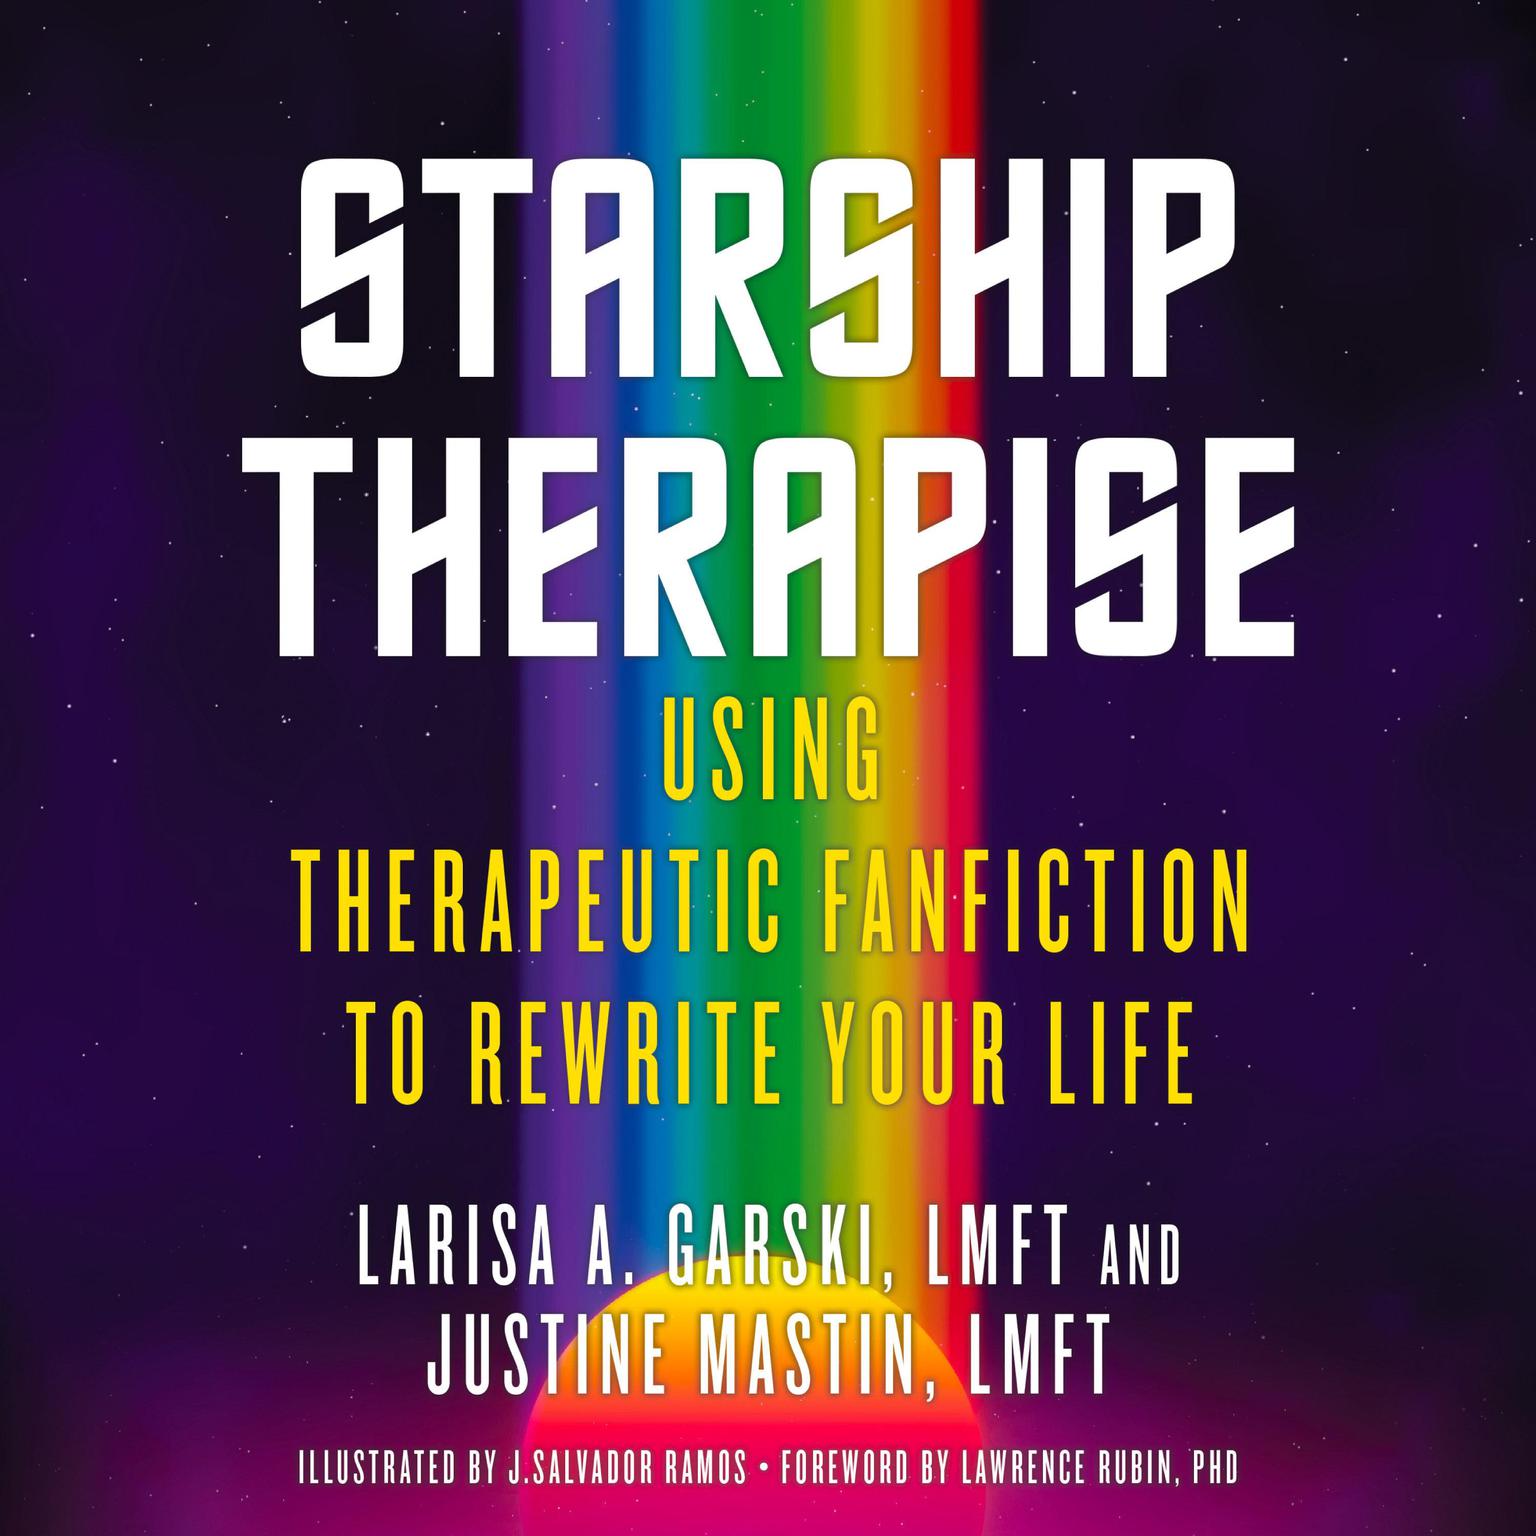 Starship Therapise: Using Therapeutic Fanfiction to Rewrite Your Life Audiobook, by Justine Mastin